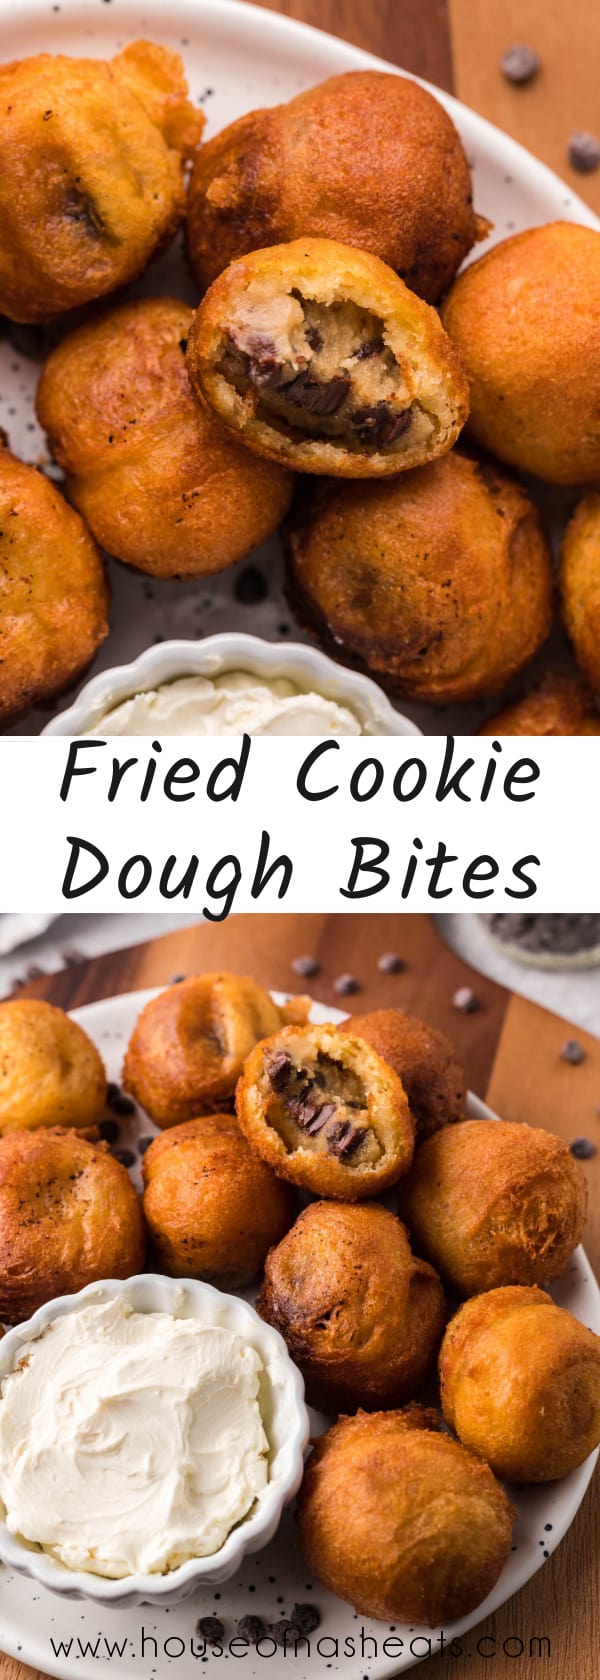 A collage of images of fried cookie dough bites with text overlay.